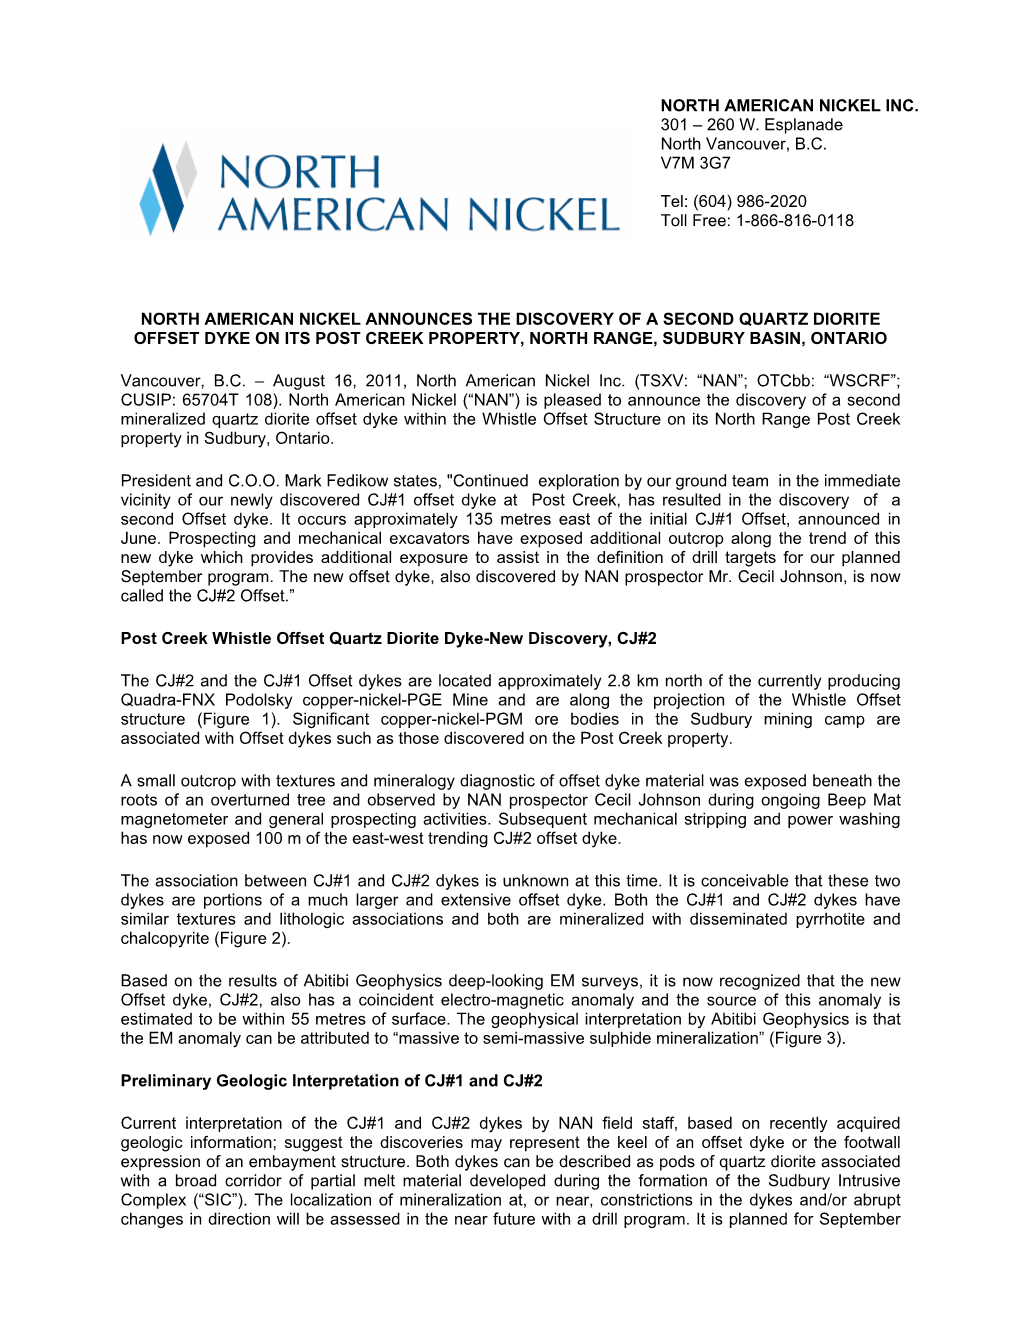 North American Nickel Announces the Discovery of a Second Quartz Diorite Offset Dyke on Its Post Creek Property, North Range, Sudbury Basin, Ontario